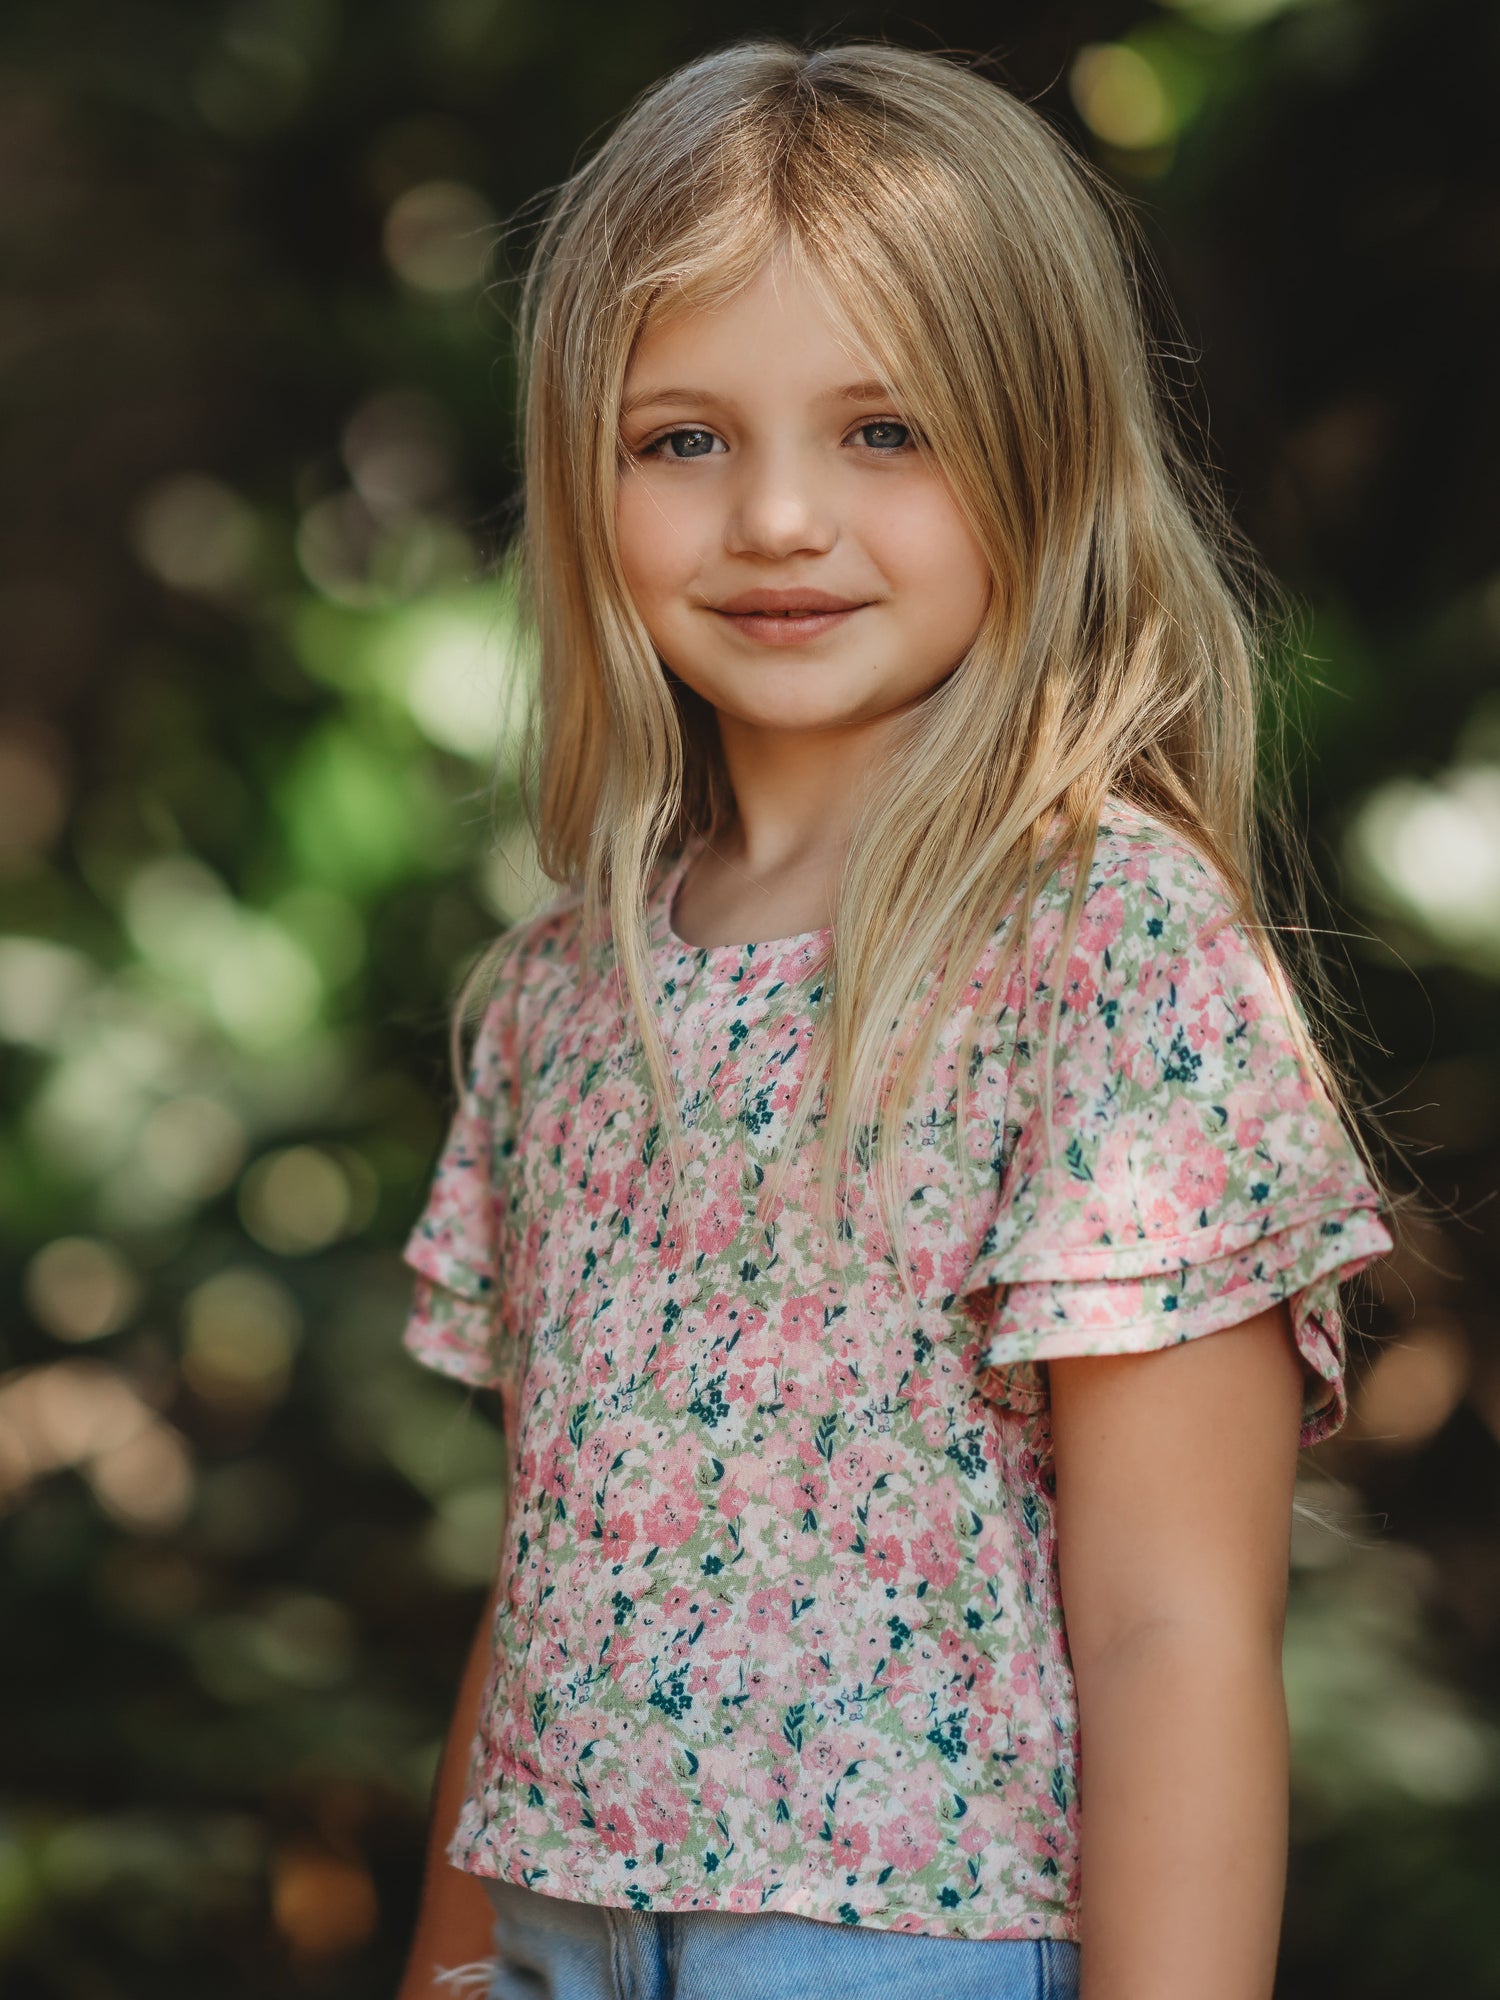 This image of a girl features the product Classic Flutter Top - Joyful. This top has a keyhole back and flowy double ruffle sleeves. It is a pink and green floral pattern.